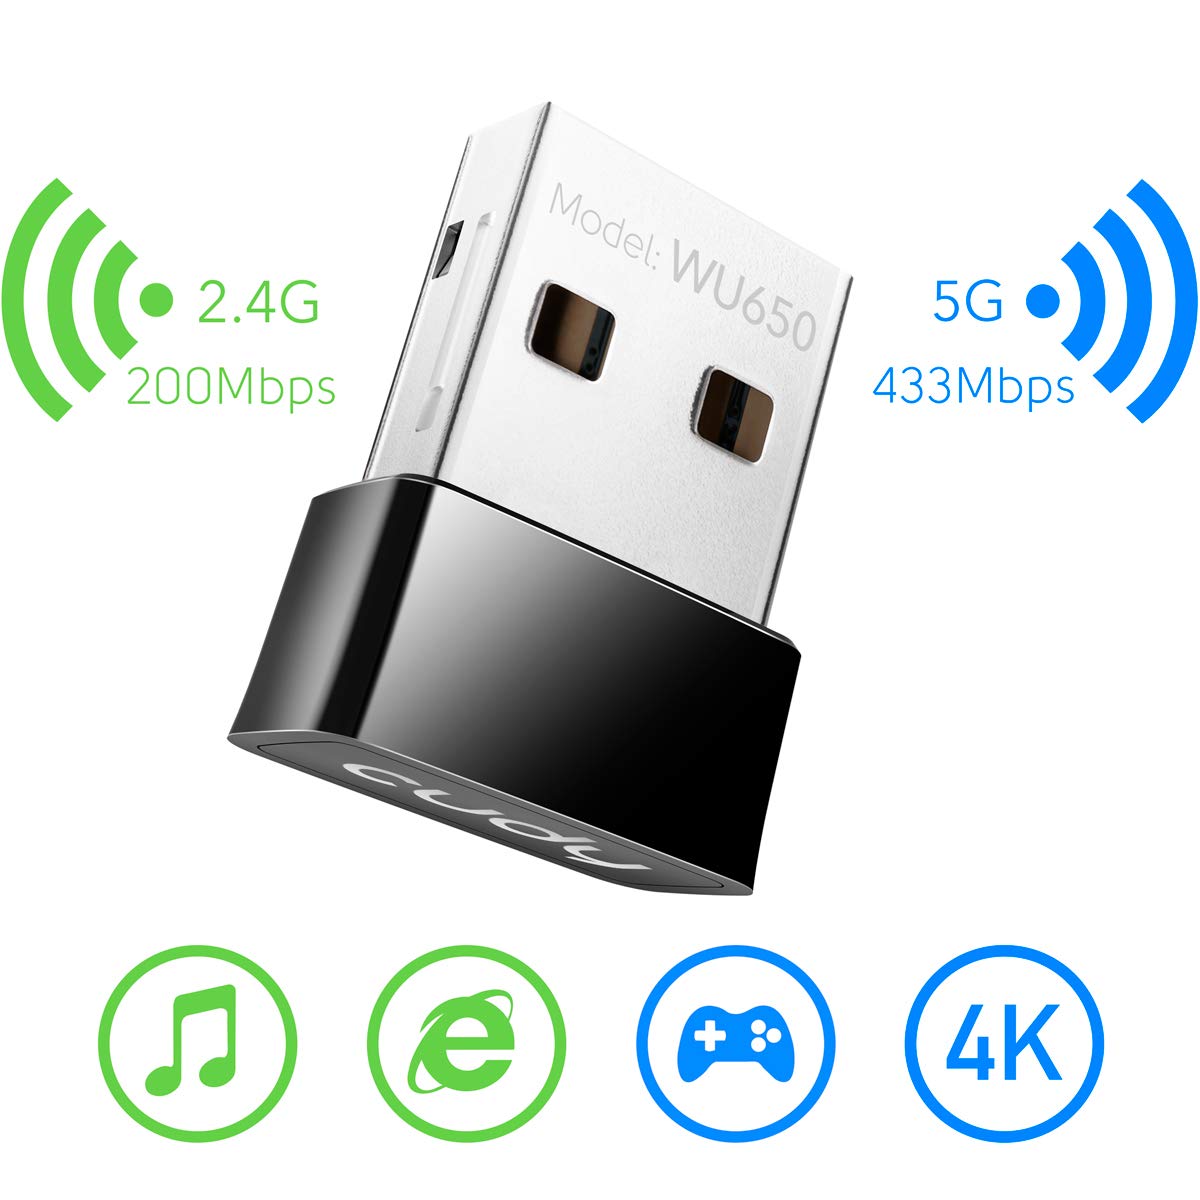 Cudy AC 650Mbps USB WiFi Adapter for PC, 5GHz/2.4GHz Wireless Dongle, WiFi Wireless Adapter for Laptop - Nano Size, Compatible with Windows XP / 7/8.x /10/11, Mac OS